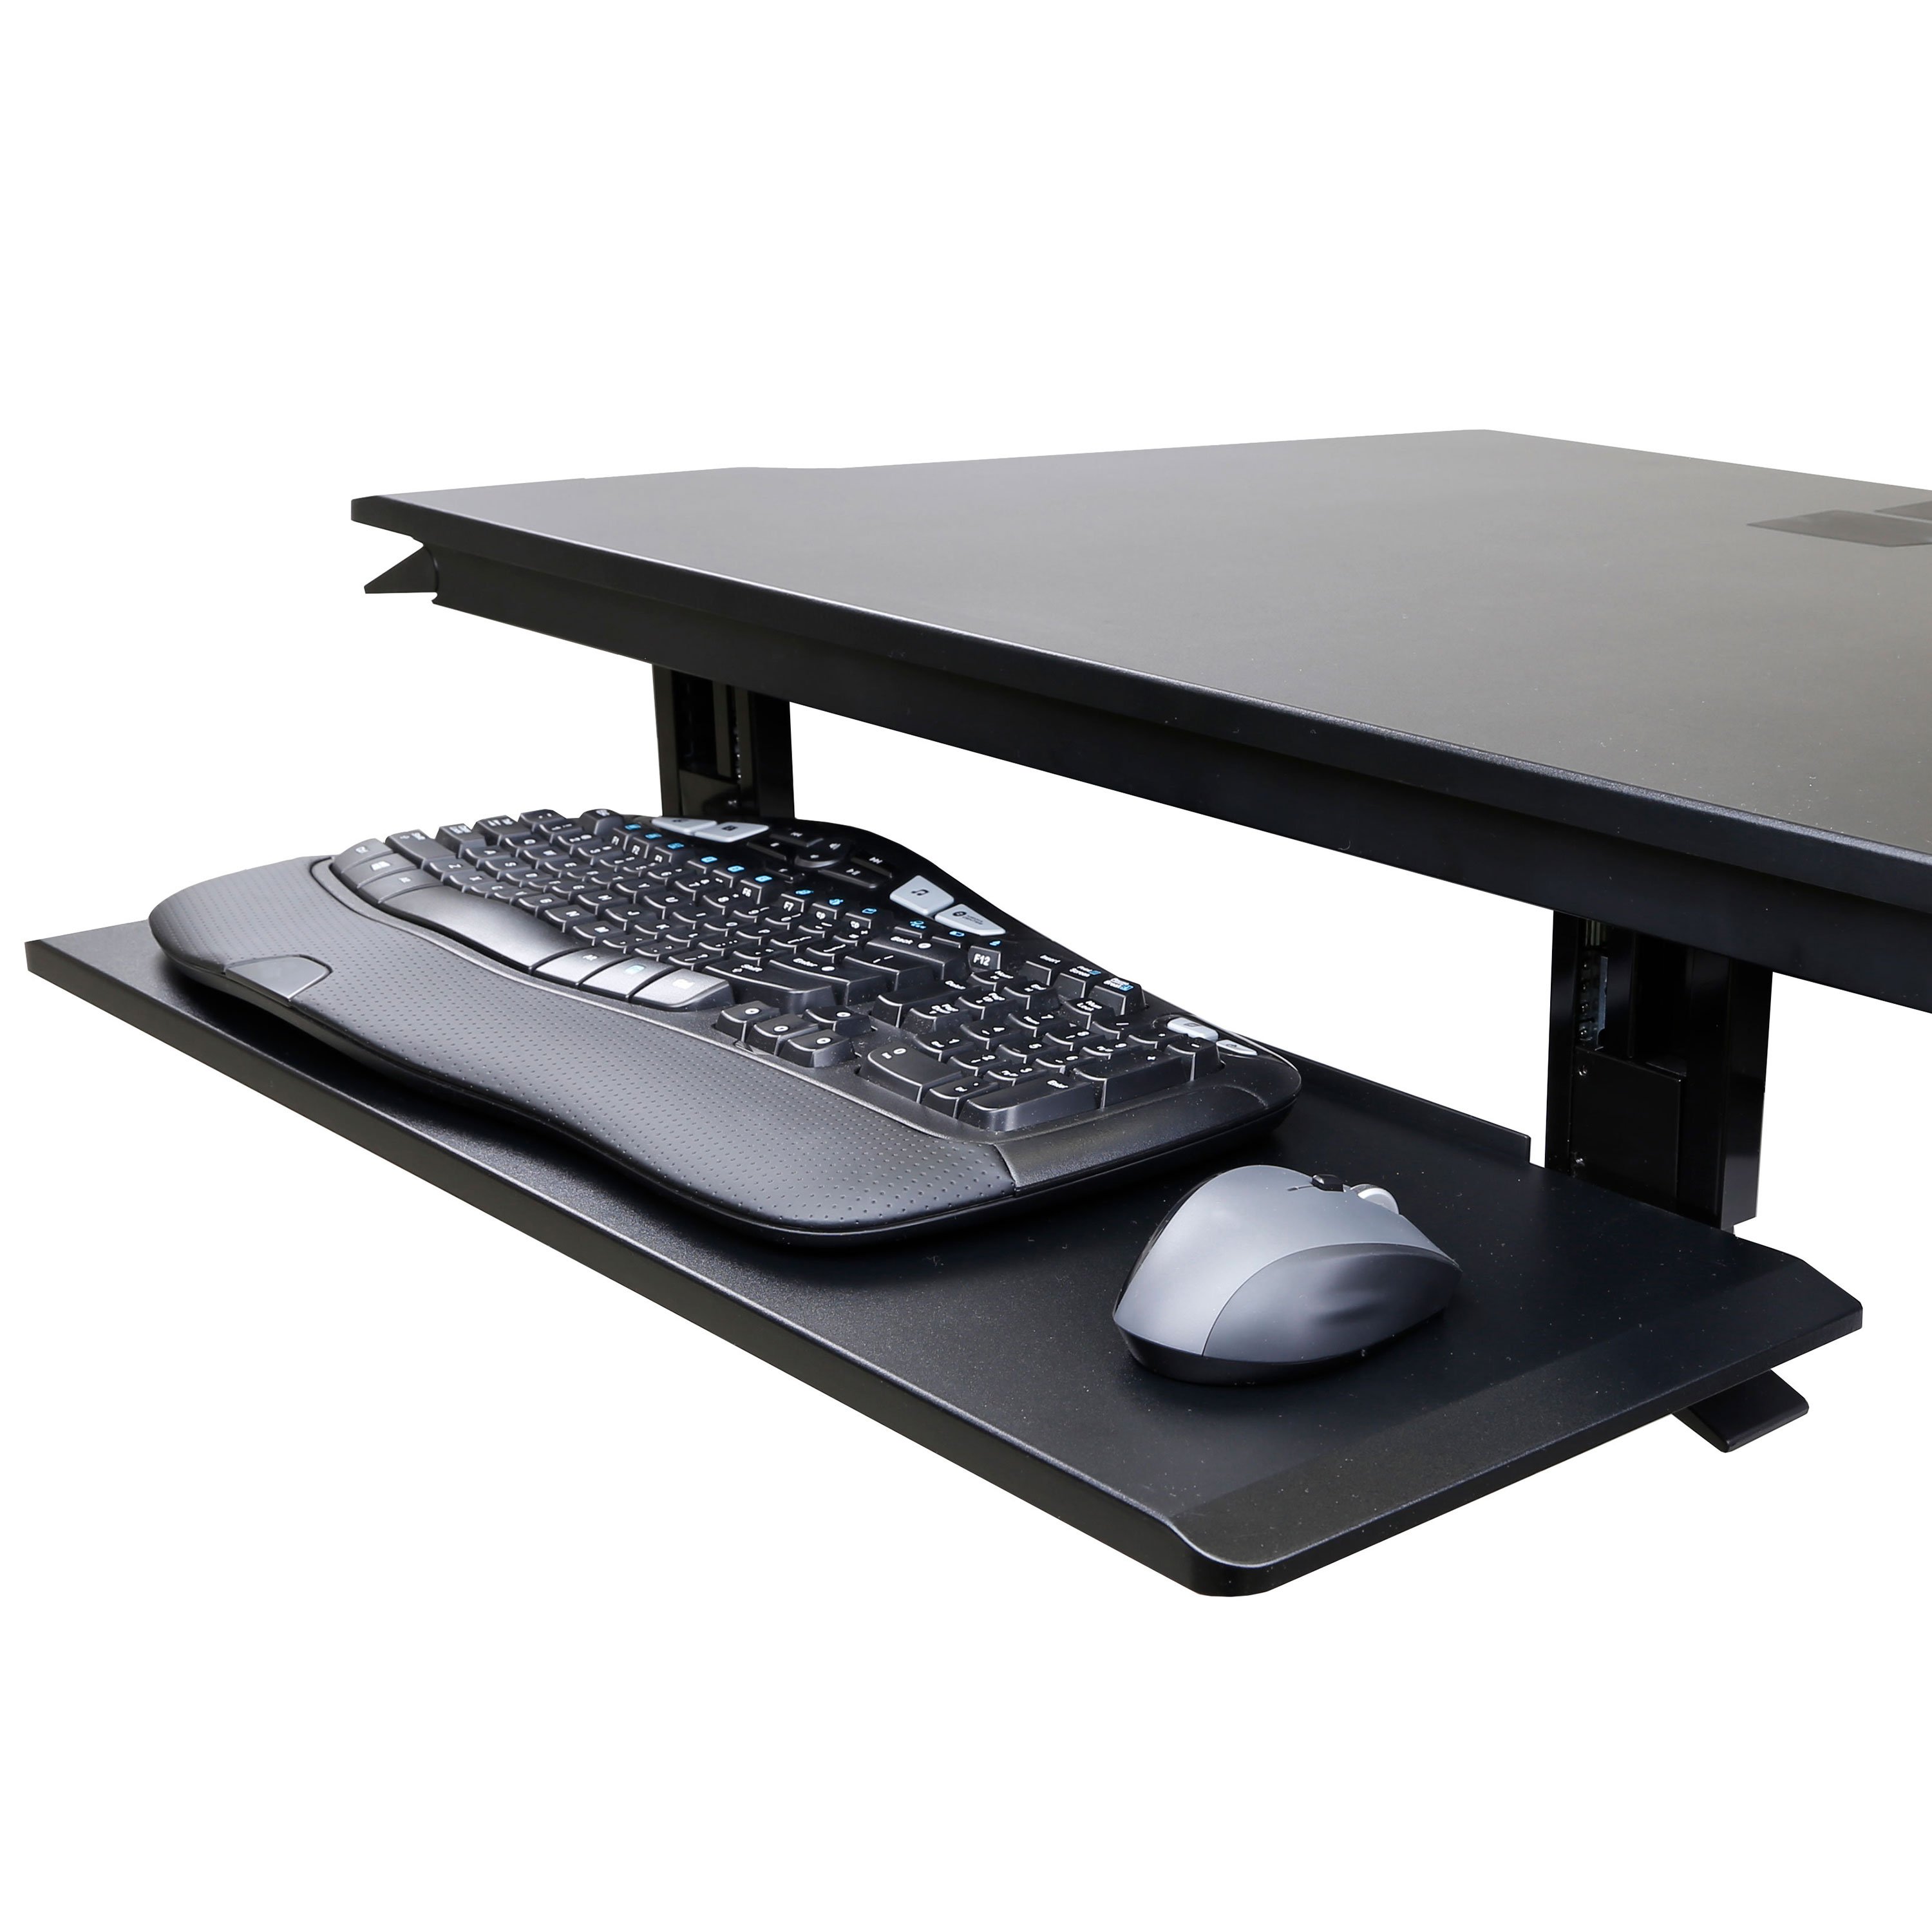 Rackit KR4 4-post keyboard/mouse tray